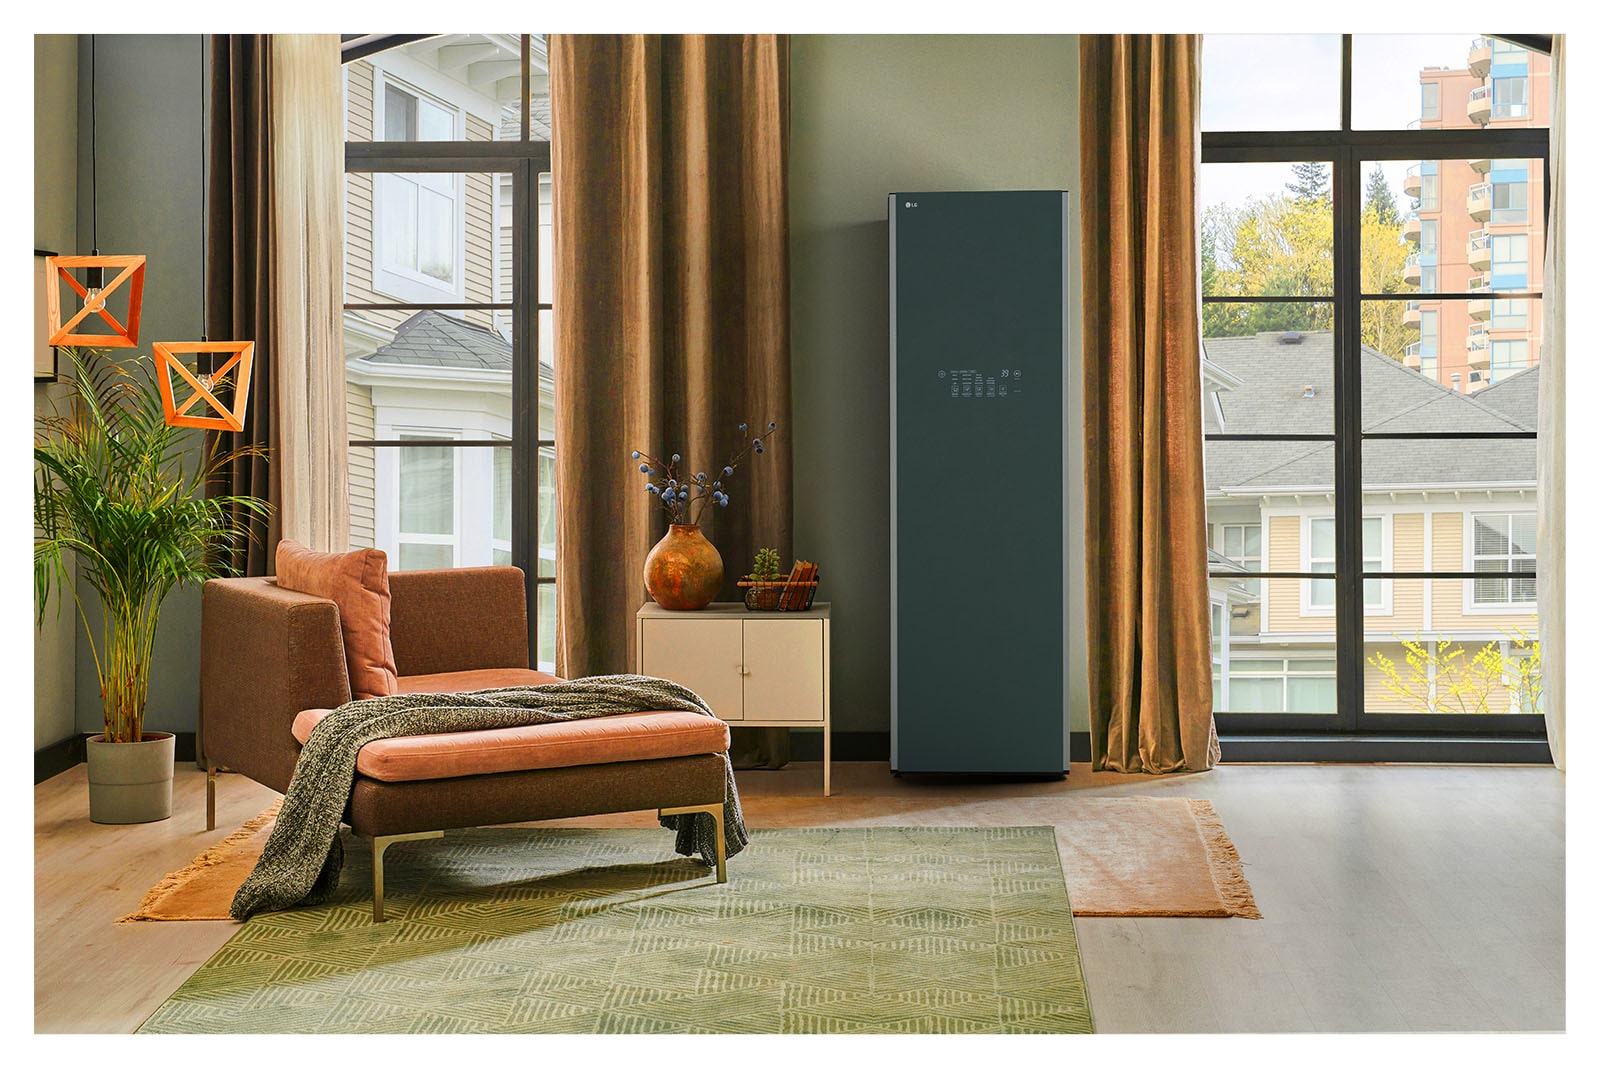 It shows mist green color LG Styler Objet Collection placed in the dressing room that matches naturally to the furniture around.